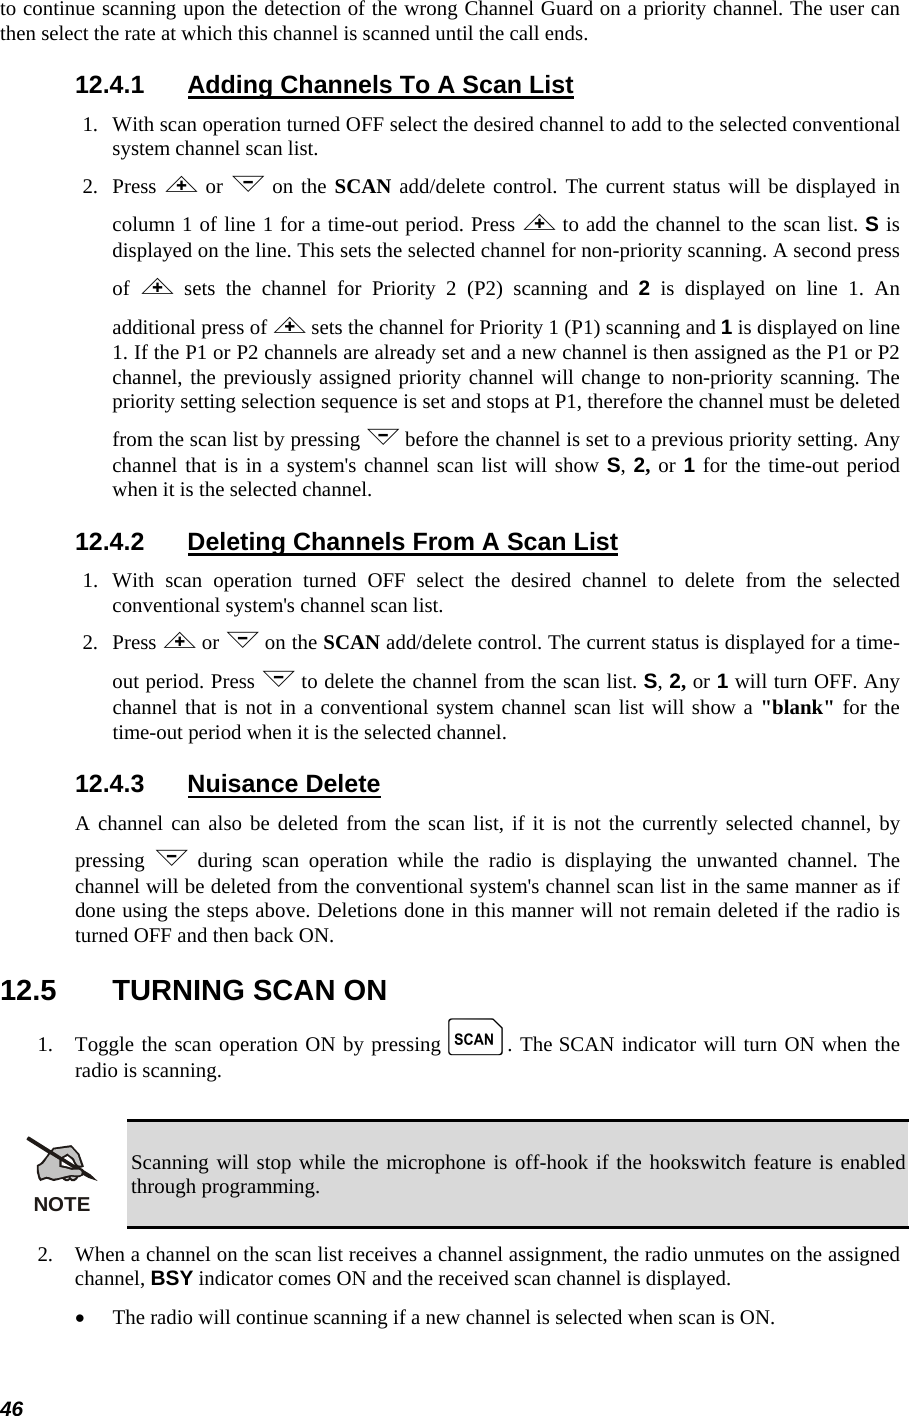  46 to continue scanning upon the detection of the wrong Channel Guard on a priority channel. The user can then select the rate at which this channel is scanned until the call ends. 12.4.1  Adding Channels To A Scan List 1.   With scan operation turned OFF select the desired channel to add to the selected conventional system channel scan list. 2.   Press &lt; or &gt; on the SCAN add/delete control. The current status will be displayed in column 1 of line 1 for a time-out period. Press &lt; to add the channel to the scan list. S is displayed on the line. This sets the selected channel for non-priority scanning. A second press of  &lt; sets the channel for Priority 2 (P2) scanning and 2 is displayed on line 1. An additional press of &lt; sets the channel for Priority 1 (P1) scanning and 1 is displayed on line 1. If the P1 or P2 channels are already set and a new channel is then assigned as the P1 or P2 channel, the previously assigned priority channel will change to non-priority scanning. The priority setting selection sequence is set and stops at P1, therefore the channel must be deleted from the scan list by pressing &gt; before the channel is set to a previous priority setting. Any channel that is in a system&apos;s channel scan list will show S, 2, or 1 for the time-out period when it is the selected channel. 12.4.2  Deleting Channels From A Scan List 1.  With scan operation turned OFF select the desired channel to delete from the selected conventional system&apos;s channel scan list. 2.   Press &lt; or &gt; on the SCAN add/delete control. The current status is displayed for a time-out period. Press &gt; to delete the channel from the scan list. S, 2, or 1 will turn OFF. Any channel that is not in a conventional system channel scan list will show a &quot;blank&quot; for the time-out period when it is the selected channel. 12.4.3 Nuisance Delete A channel can also be deleted from the scan list, if it is not the currently selected channel, by pressing  &gt; during scan operation while the radio is displaying the unwanted channel. The channel will be deleted from the conventional system&apos;s channel scan list in the same manner as if done using the steps above. Deletions done in this manner will not remain deleted if the radio is turned OFF and then back ON. 12.5  TURNING SCAN ON 1.   Toggle the scan operation ON by pressing k. The SCAN indicator will turn ON when the radio is scanning.  NOTE Scanning will stop while the microphone is off-hook if the hookswitch feature is enabled through programming. 2.   When a channel on the scan list receives a channel assignment, the radio unmutes on the assigned channel, BSY indicator comes ON and the received scan channel is displayed. •  The radio will continue scanning if a new channel is selected when scan is ON. 